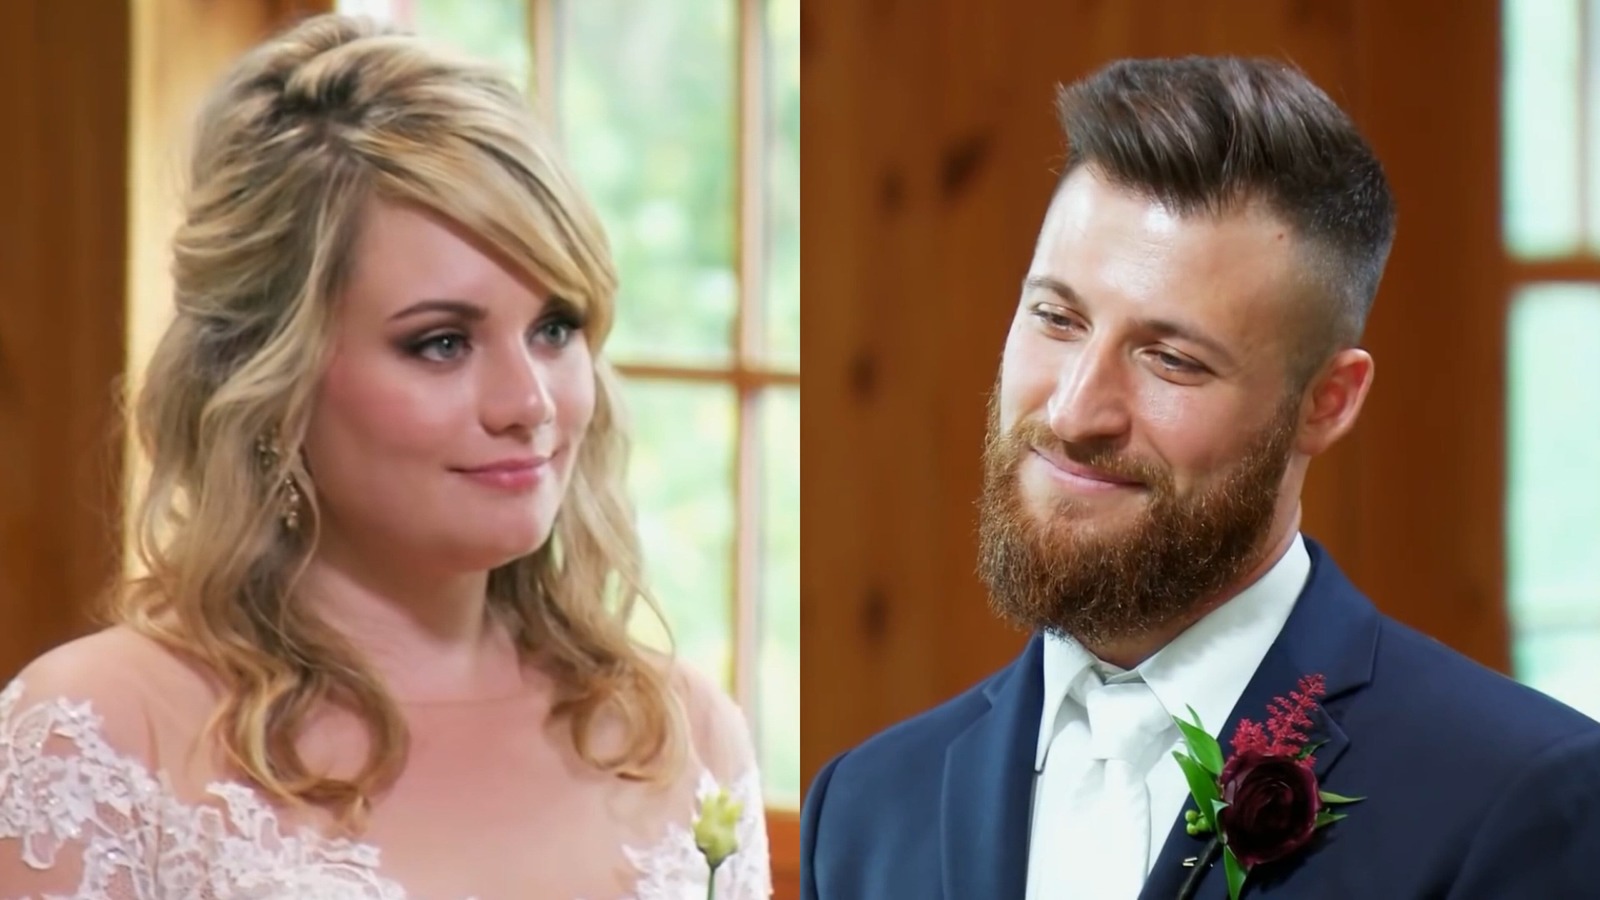 Asien skjold Regn Married At First Sight: The Real Reason Luke Cuccurullo And Kate Sisk Split